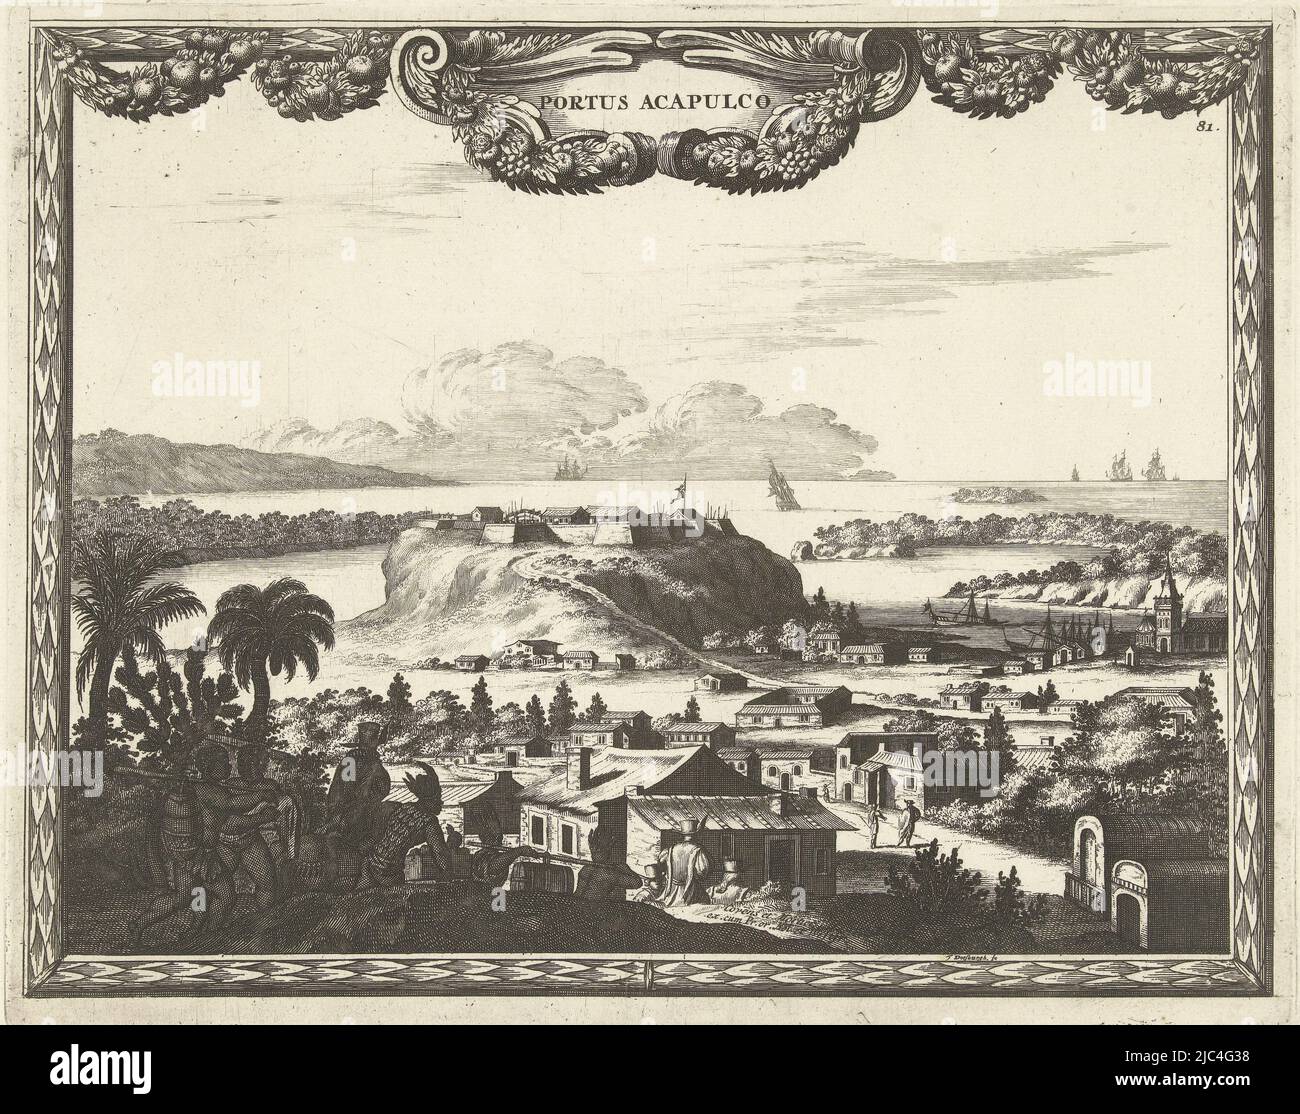 View of harbor and fort near Acapulco with locals. In rectangular frame, above cartouche with garlands, View of harbor and fort at Acapulco, print maker: Thomas Doesburgh, (mentioned on object), publisher: Covens & Mortier, (mentioned on object), Staten van Holland en West-Friesland, (mentioned on object), print maker: Netherlands, publisher: Amsterdam, 1685 - 1714, paper, etching, h 225 mm × w 283 mm Stock Photo